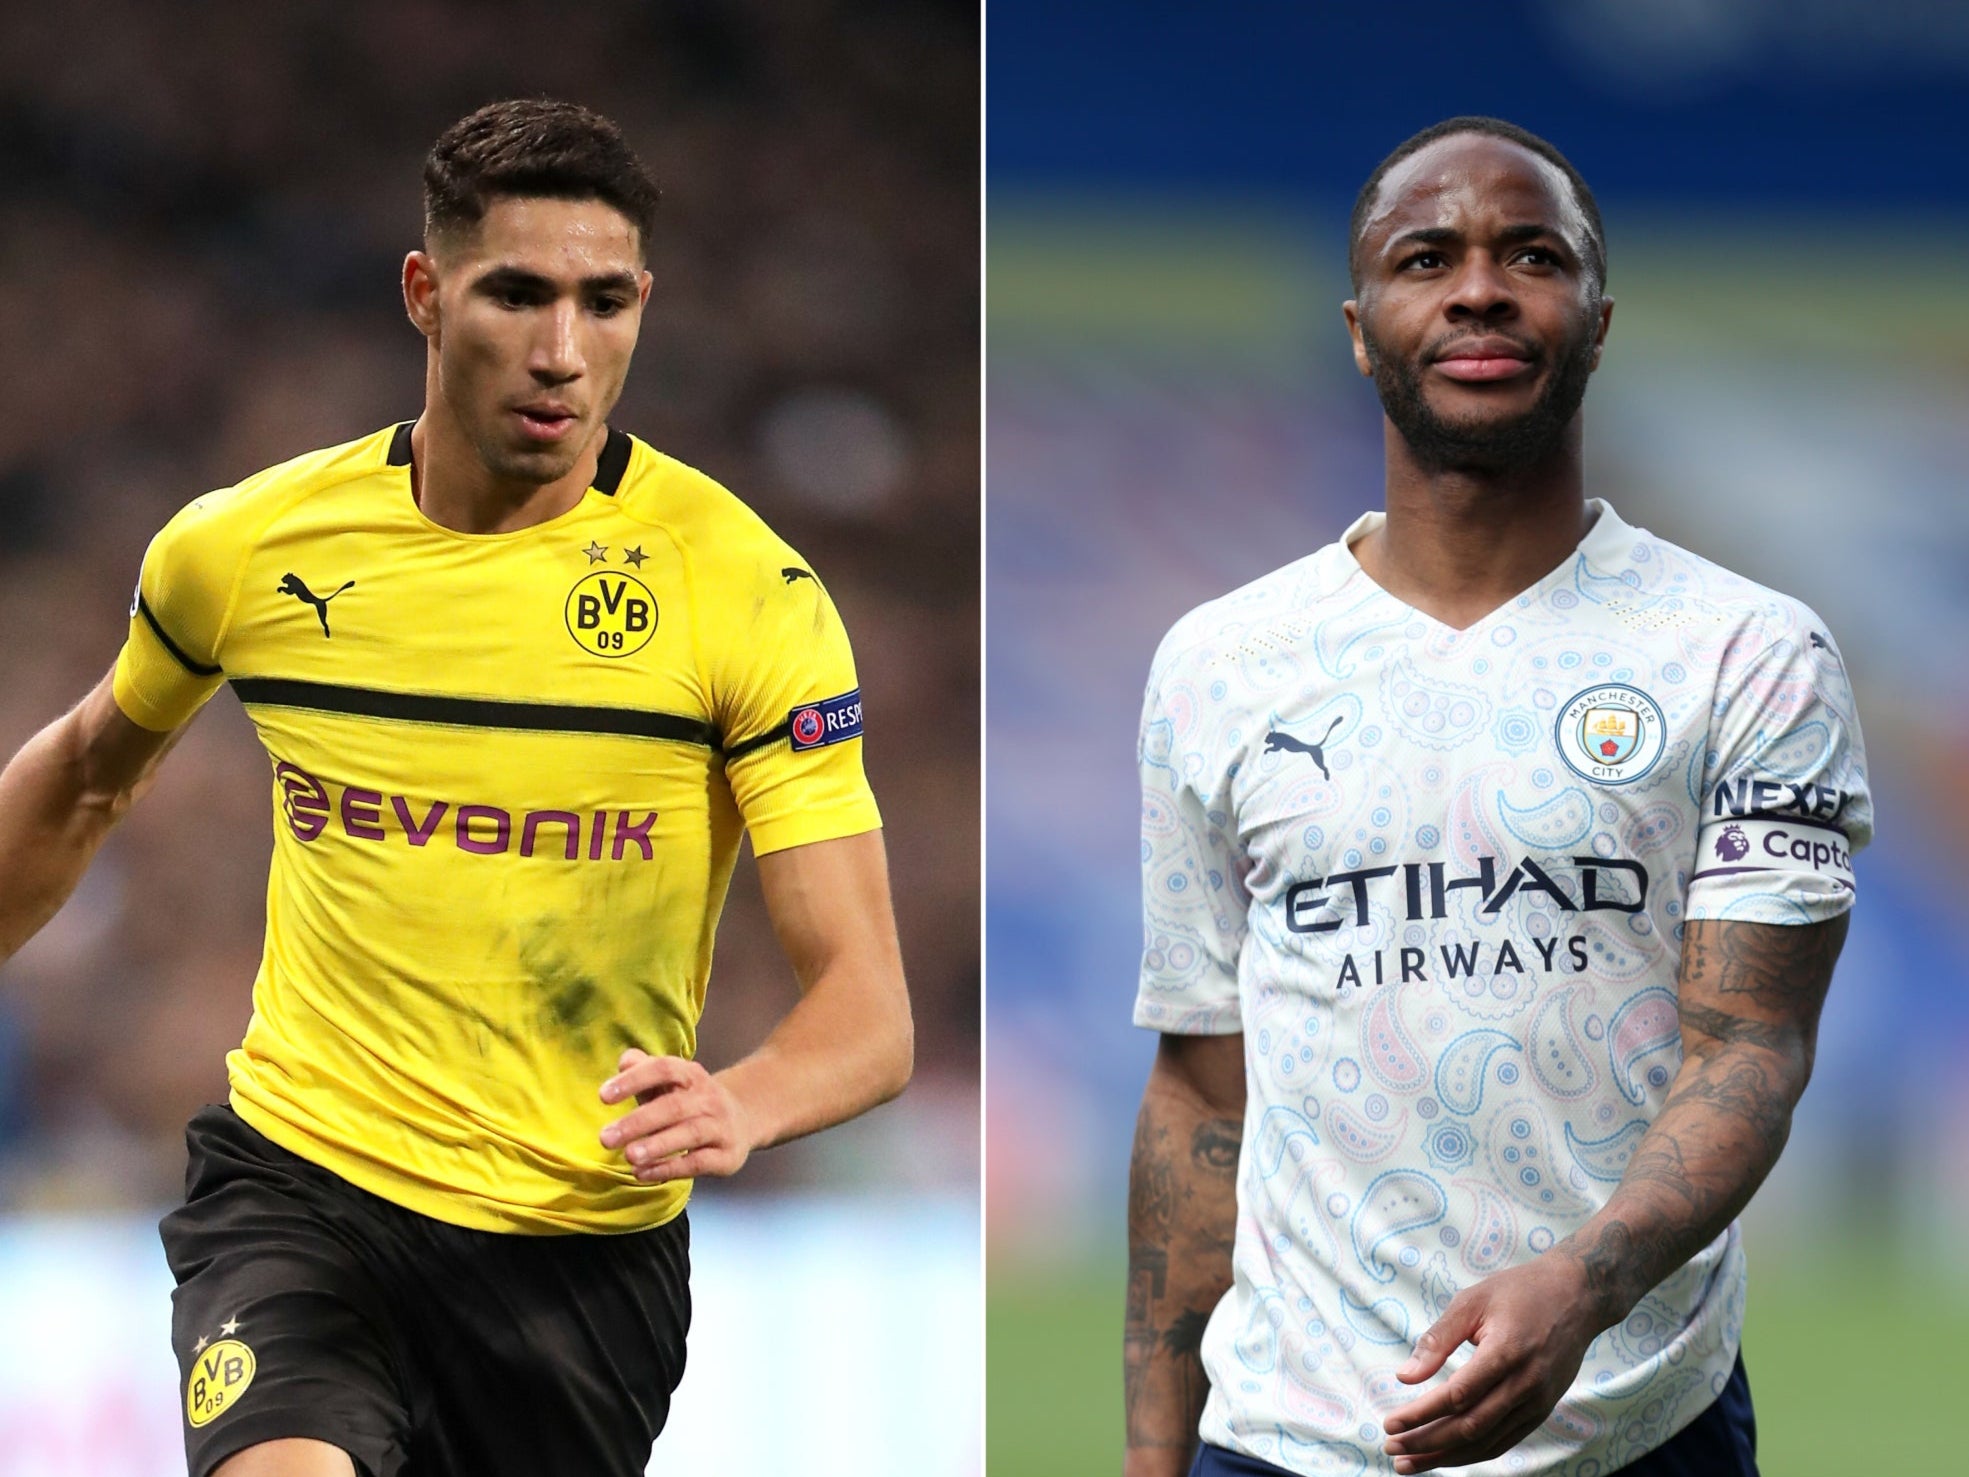 Composite image of Achraf Hakimi (left) and Raheem Sterling